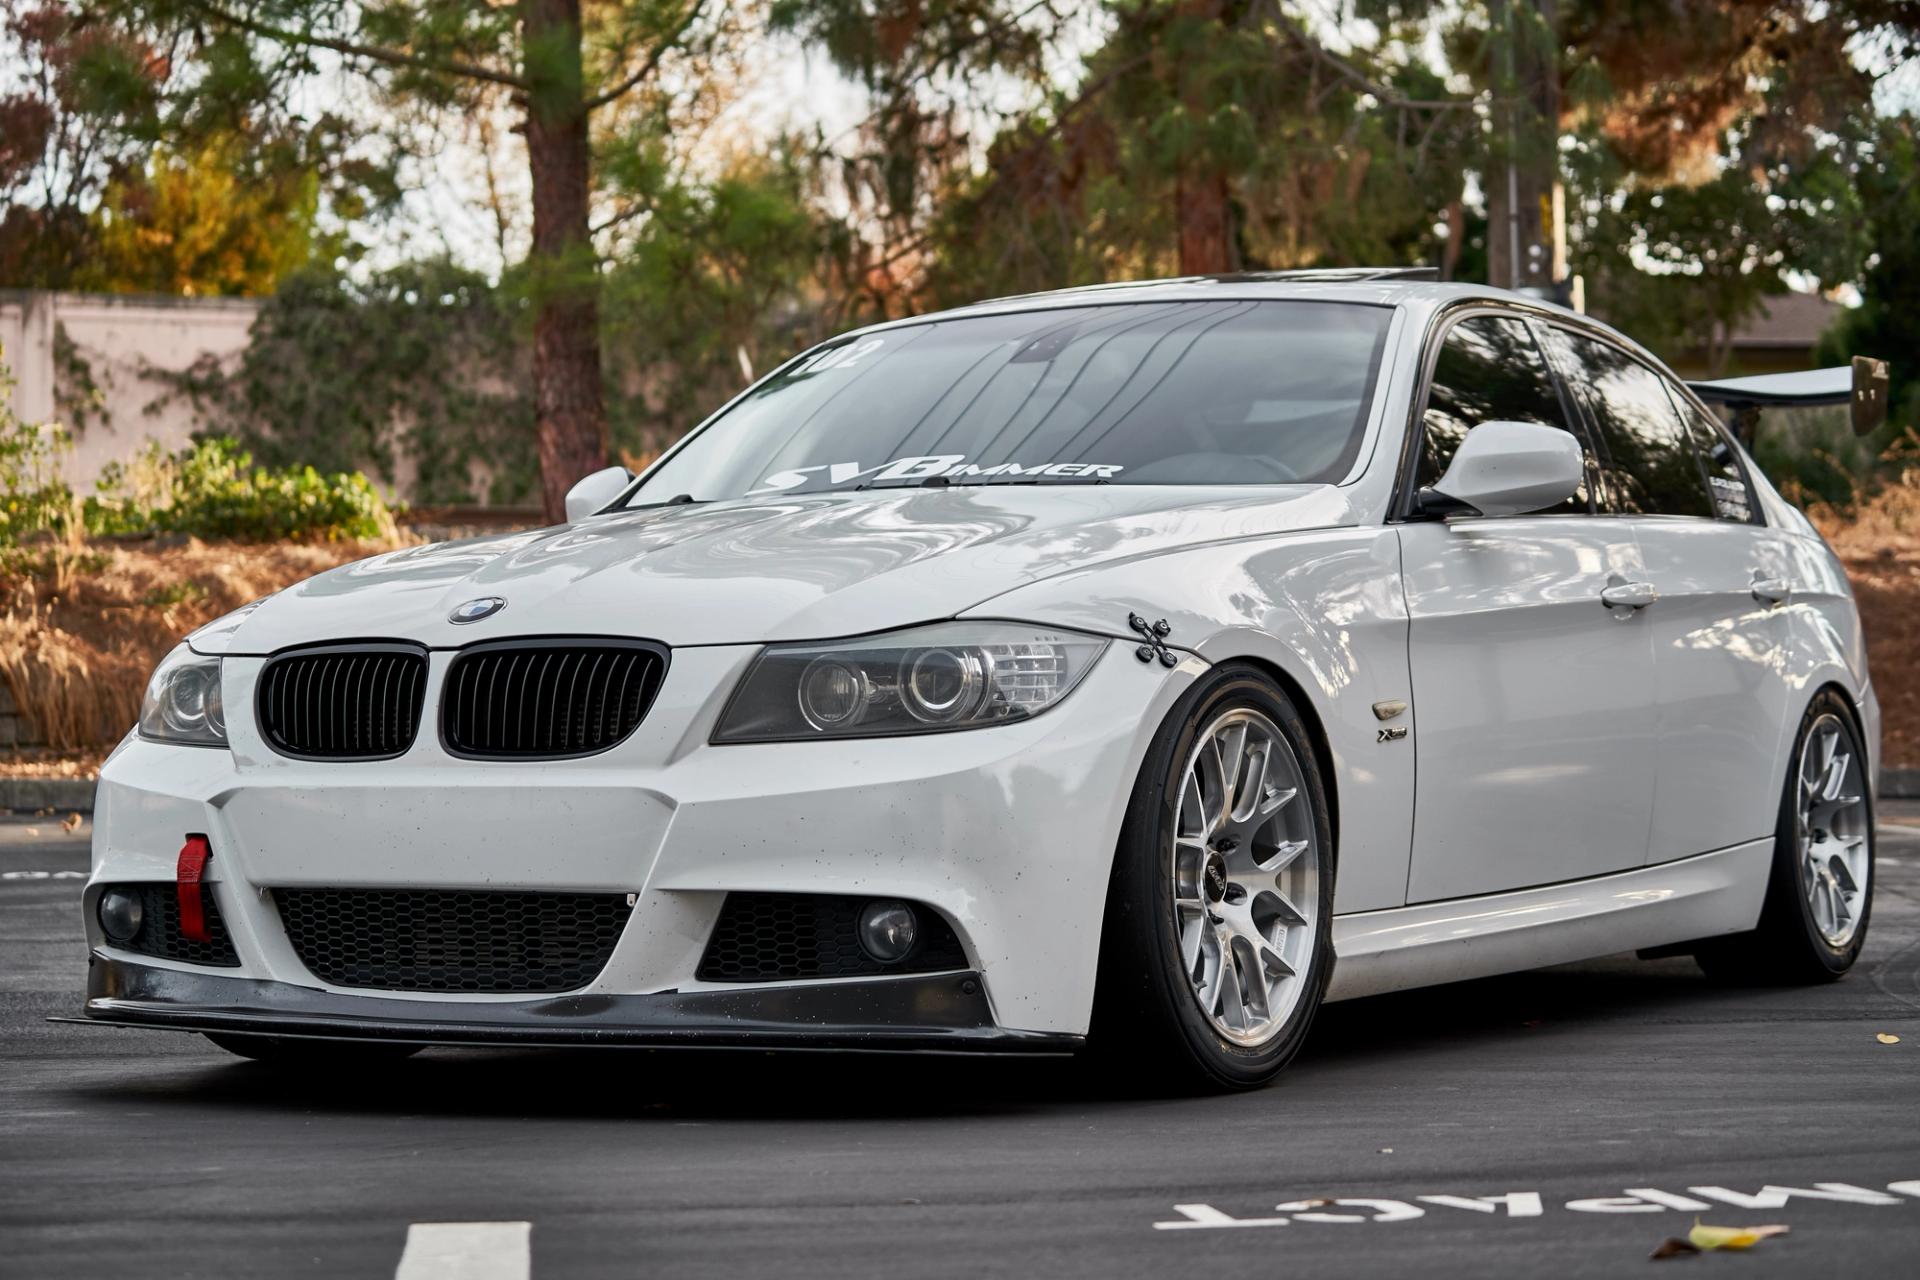 BMW E90 LCI Sedan 3 Series with 17" EC-7R in Brushed Clear